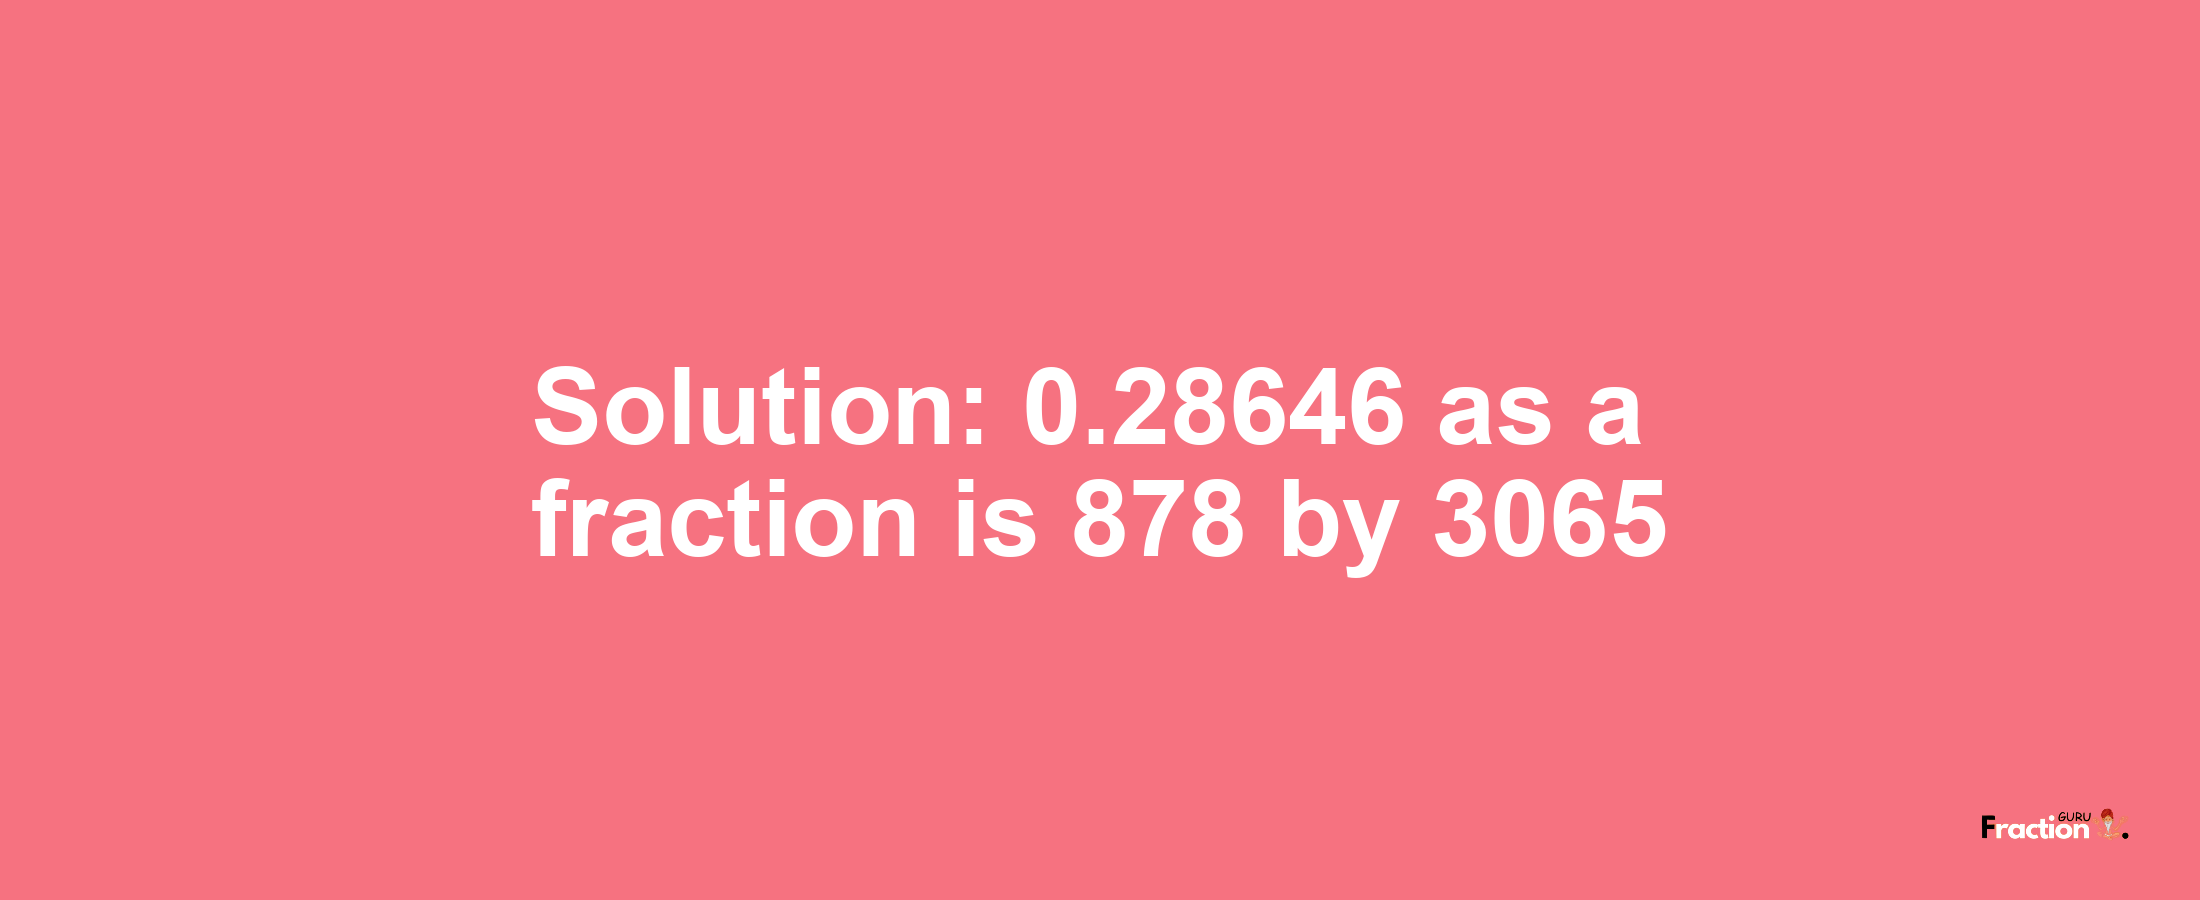 Solution:0.28646 as a fraction is 878/3065